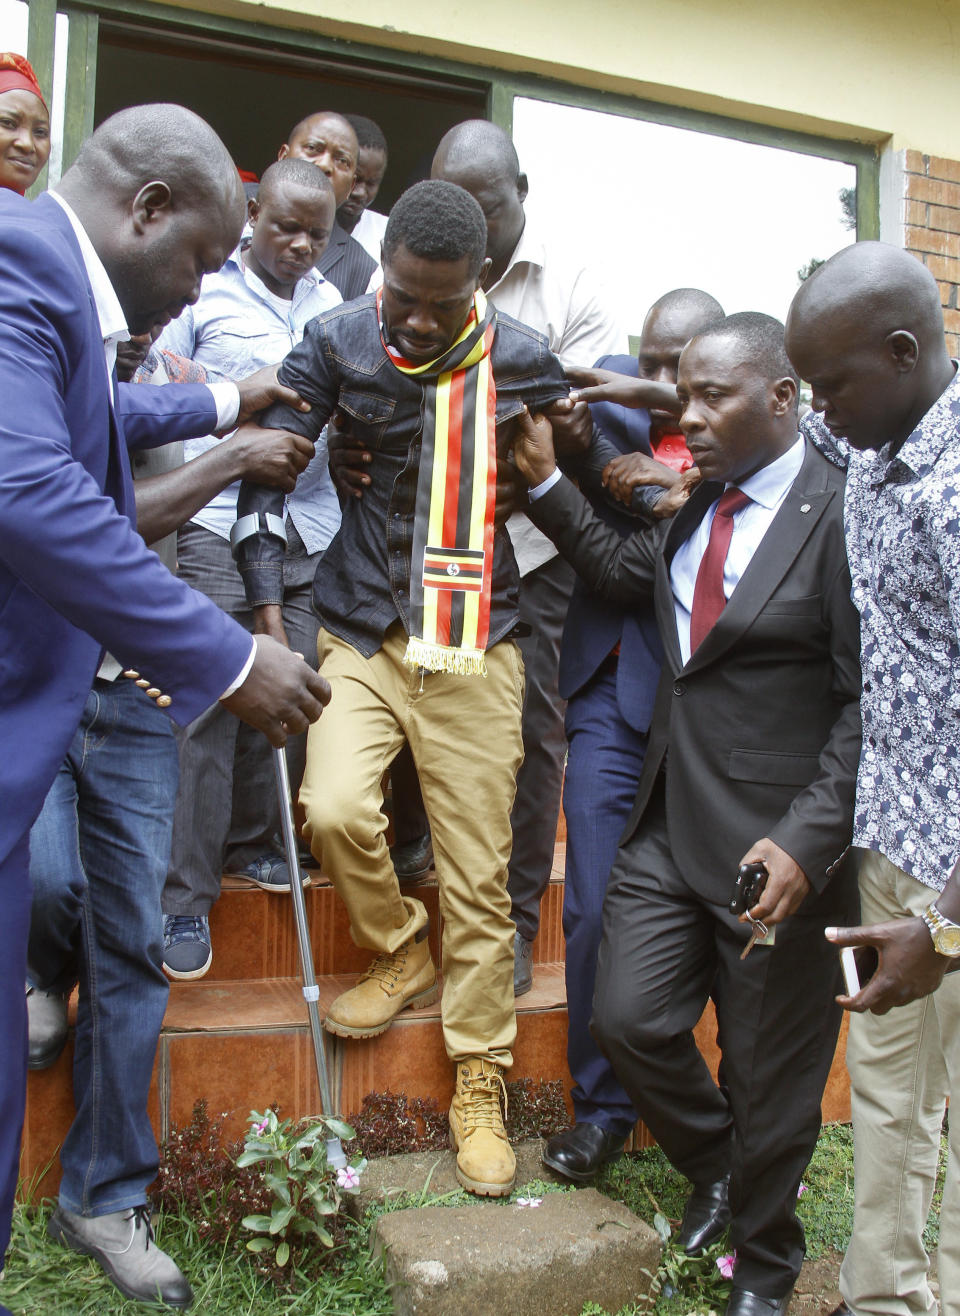 FILE - In this Thursday, Aug. 23, 2018 file photo, Ugandan pop star-turned-lawmaker Kyagulanyi Ssentamu, also known as Bobi Wine, center, is assisted walking on crutches as he is led out of a magistrate's court towards a prison van, in Gulu, northern Uganda. Wine is due to return home on Thursday, Sept. 20, 2018 after seeking treatment in the United States for injuries suffered during alleged state torture. (AP Photo, File)